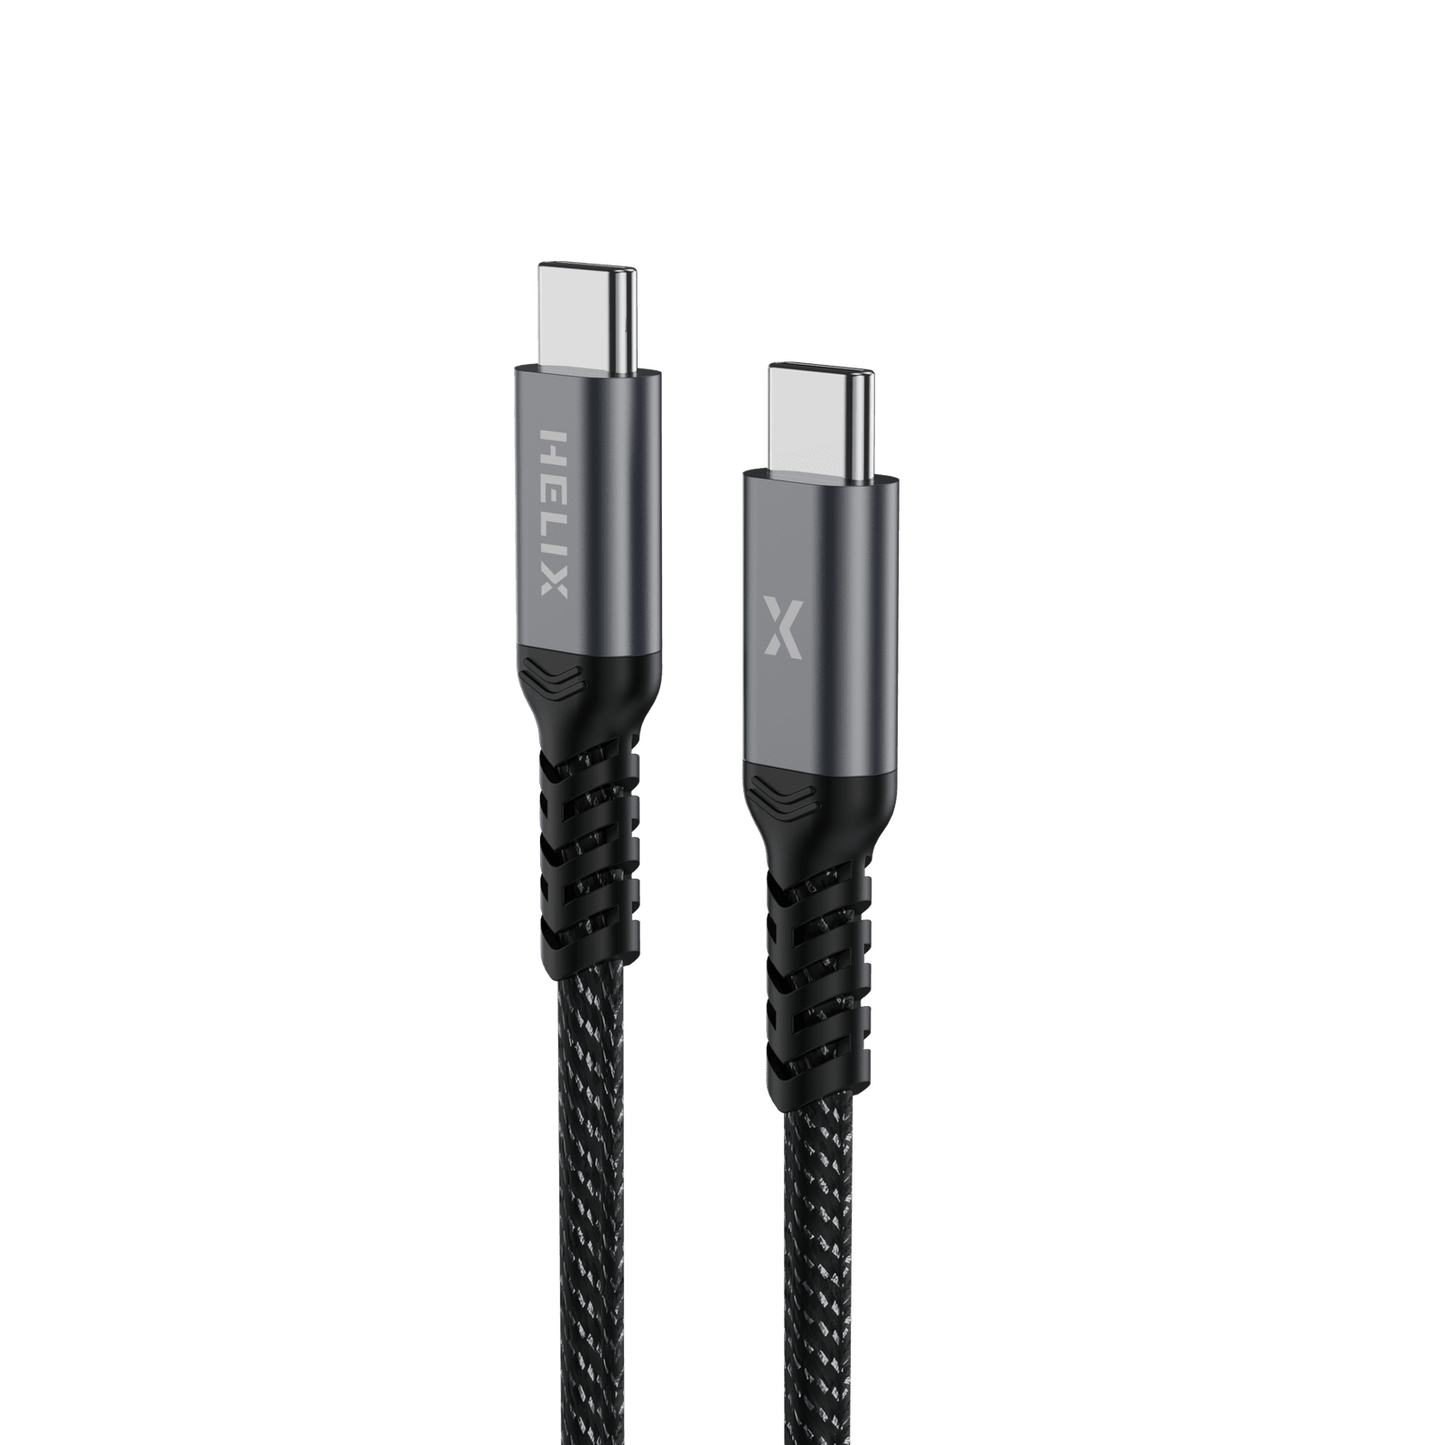 HELIX 100W USB-C to USB-C Cable With USB 3.1, PD3.0, 5A/20V, 10GBps DaHELIX USB-C to USB-C Cable 100W 2M - USB 2.0, PD3.0, Braided - BlackElevate your charging game with the HELIX USB-C to USB-C Cable. This 2-meter cable delivers a powCablesHELIXHELIX